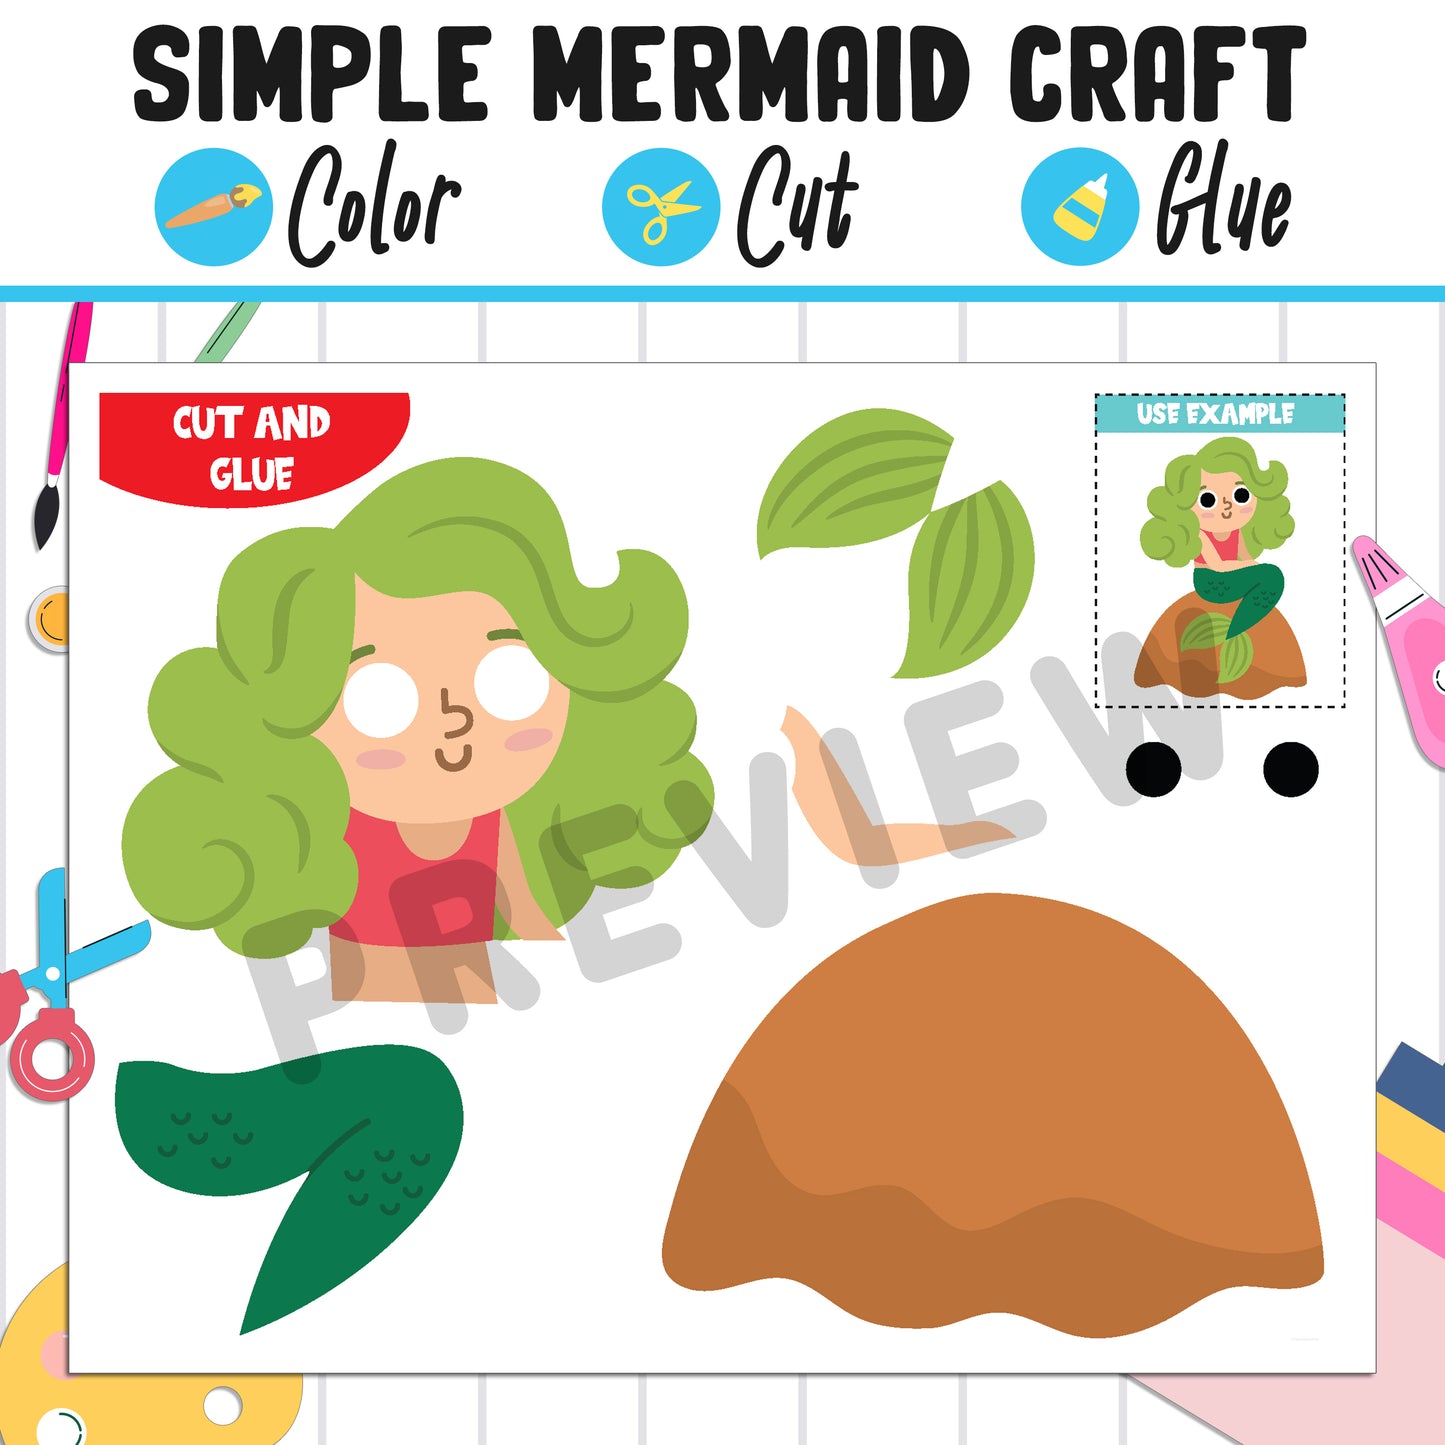 Simple Mermaid Craft for Kids: Color, Cut, and Glue, a Fun Activity for Pre K to 2nd Grade, PDF Instant Download